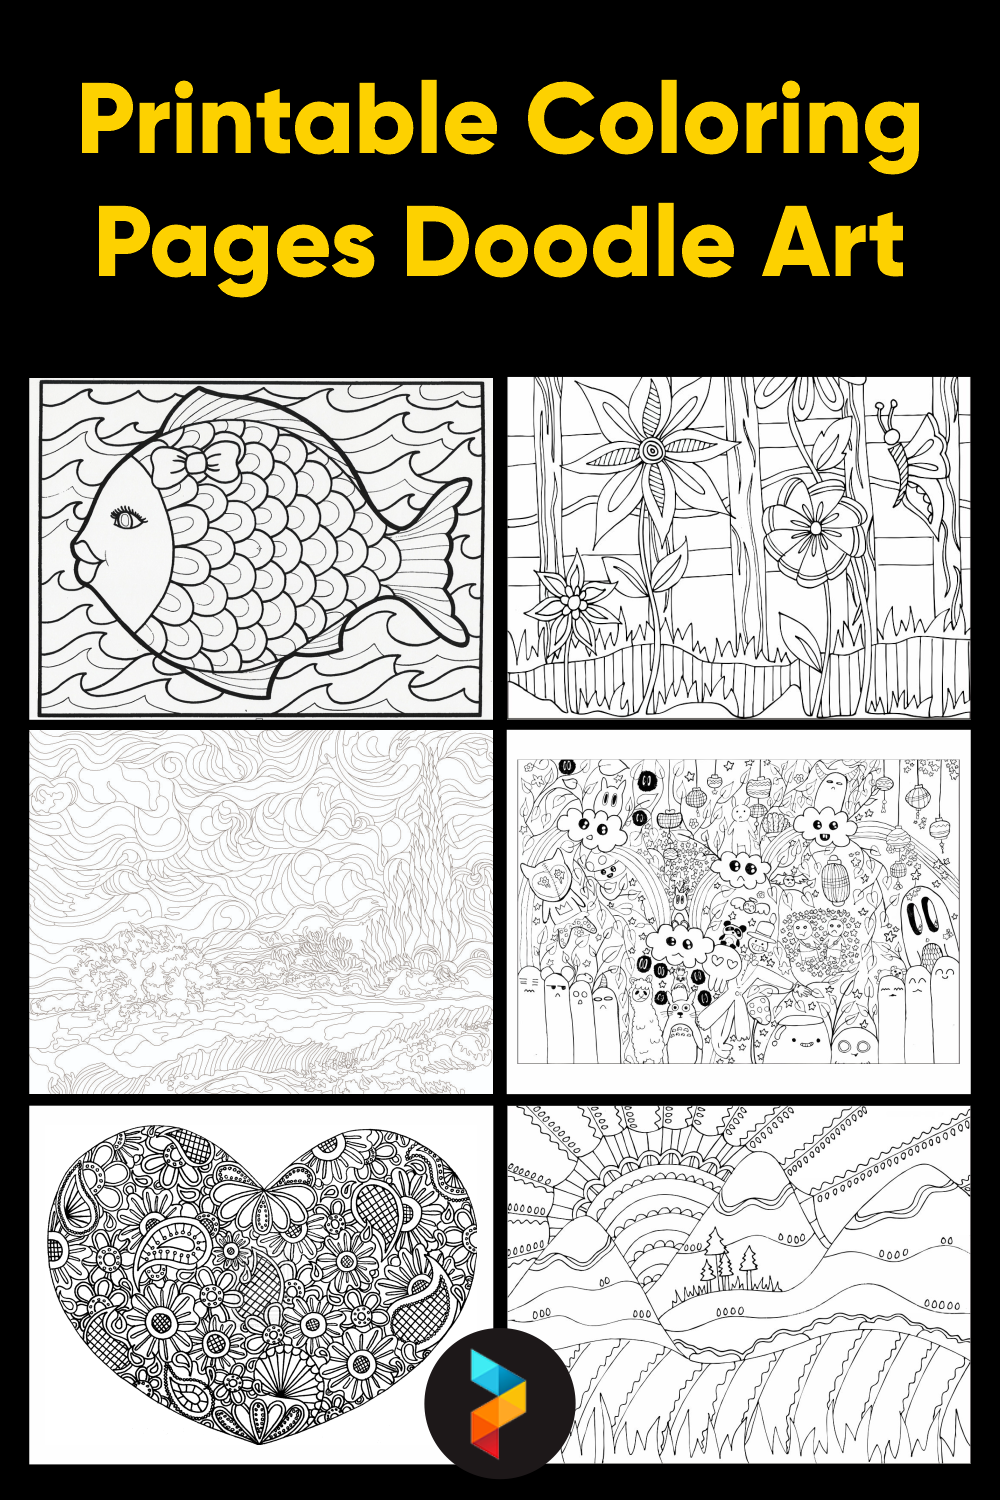 Printable Coloring Pages Doodle Art